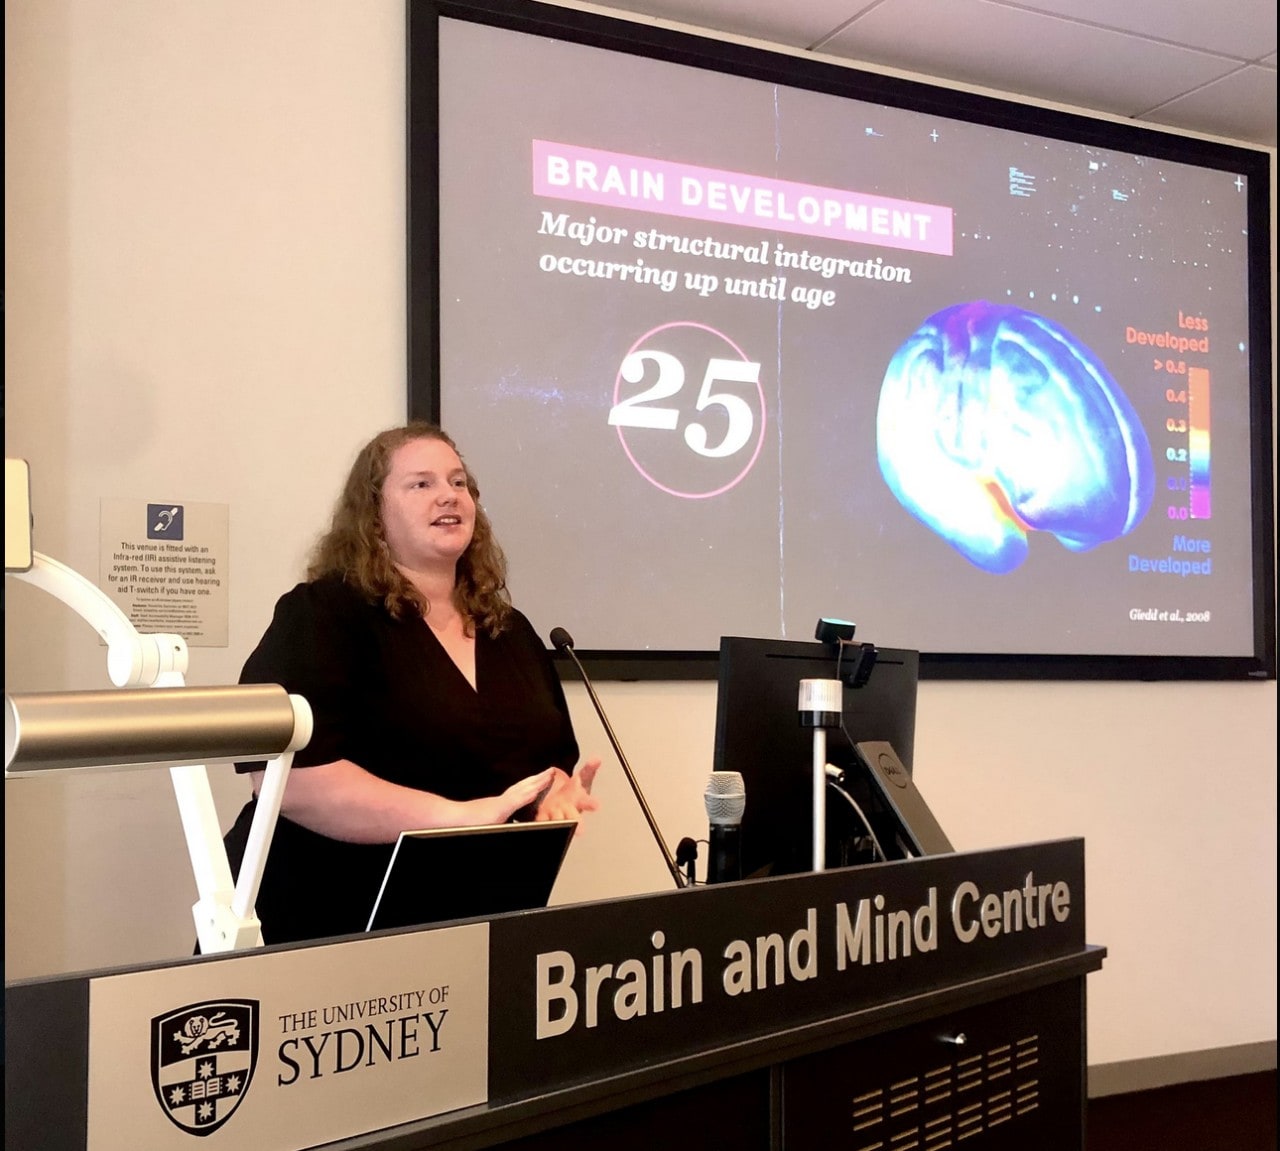 Steph presenting at a conference. She is standing behind a podium, and there is a slide in the background discussing the Illicit Project, a brain relationship program Steph leads.